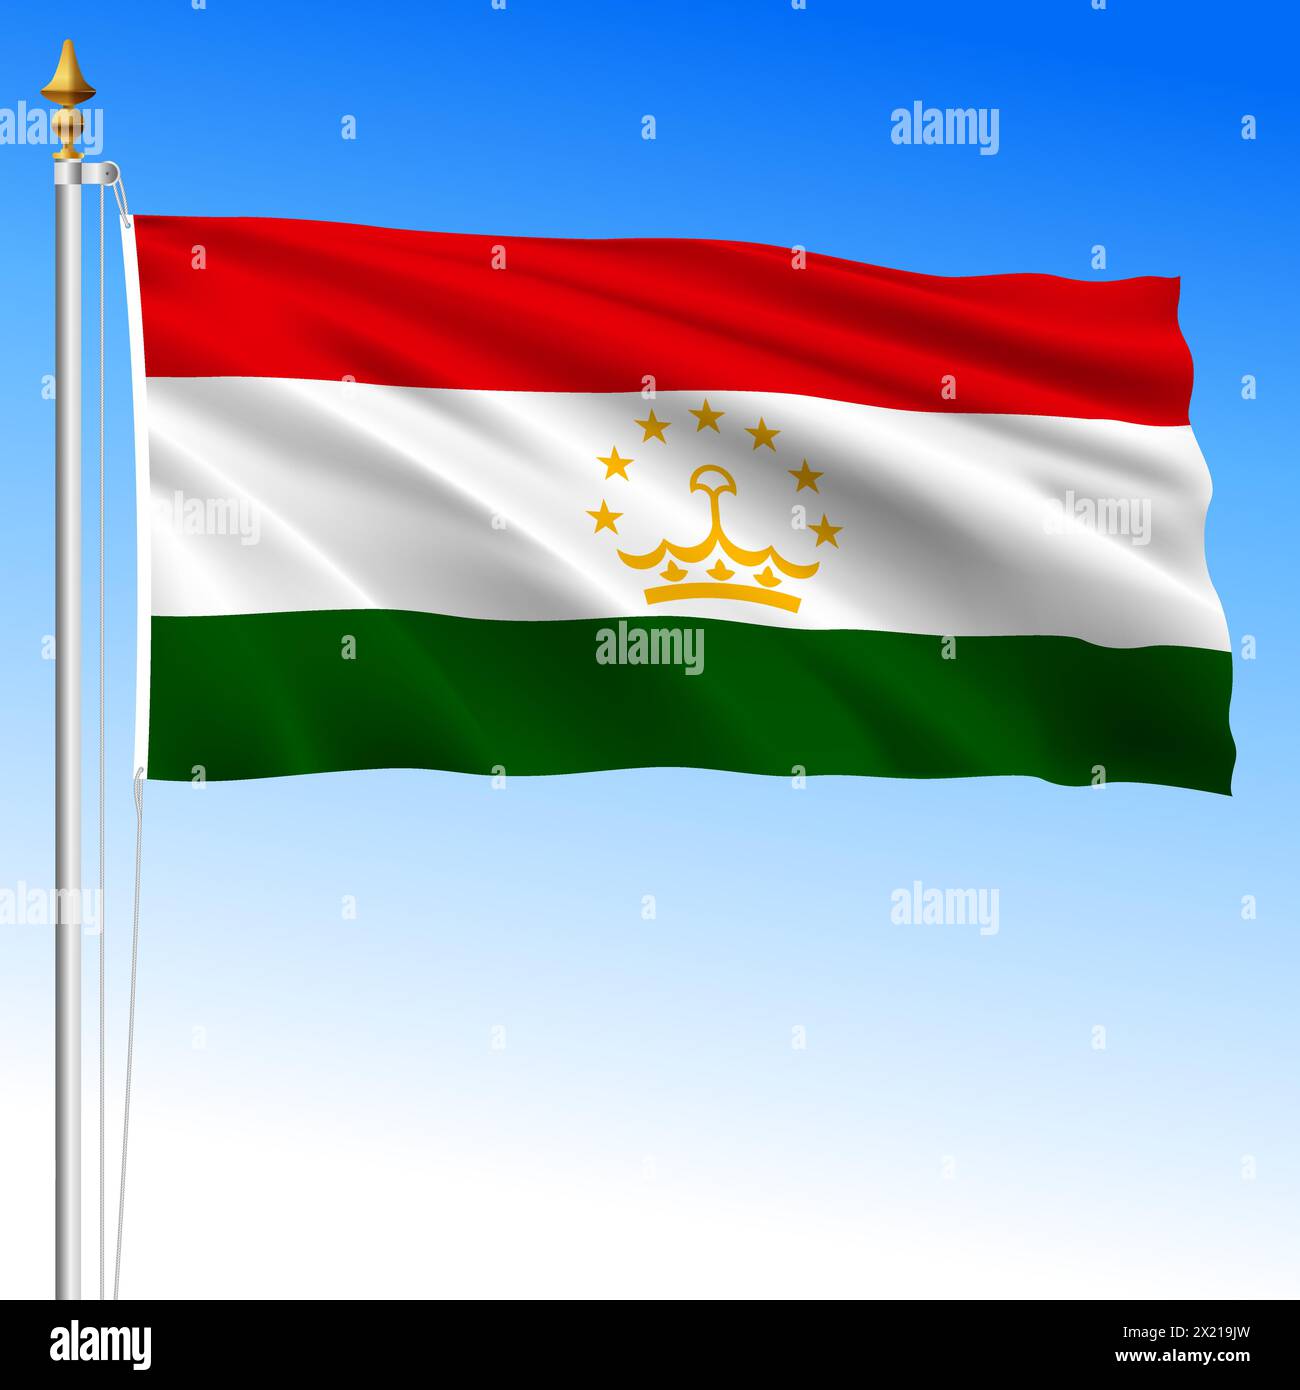 Tajikistan, official national waving flag, asiatic country, vector illustration Stock Vector